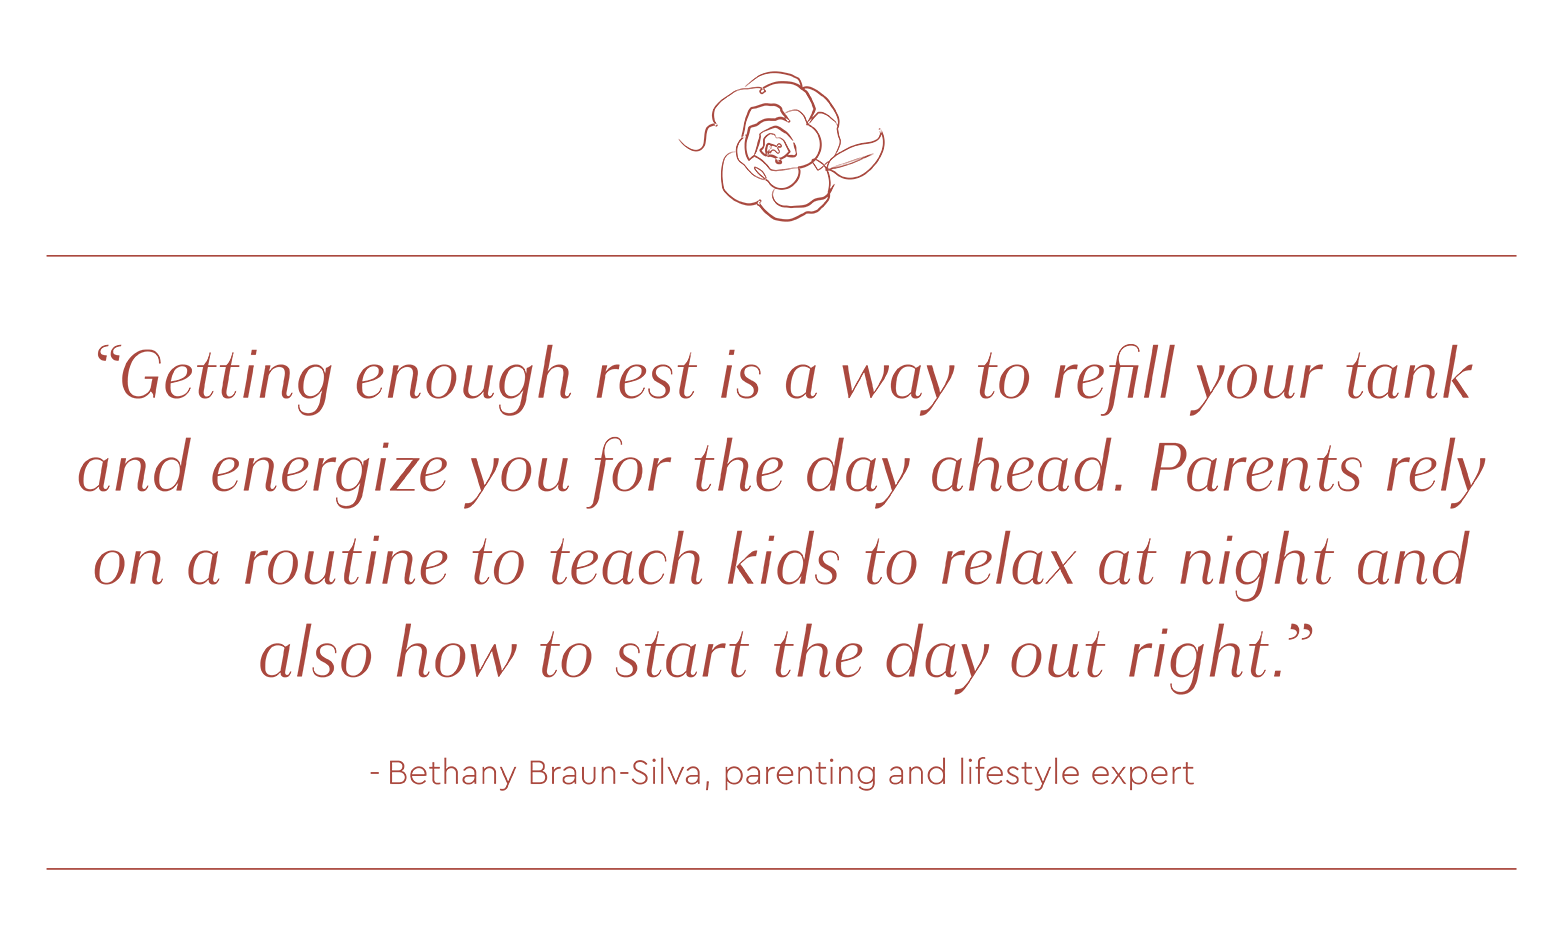 Quote by Bethany Braun-Silva: "Getting enough rest is a way to refill your tank and energize you for the day ahead. Parents rely on a routine to teach kids to relax at night and also how to start the day out right."